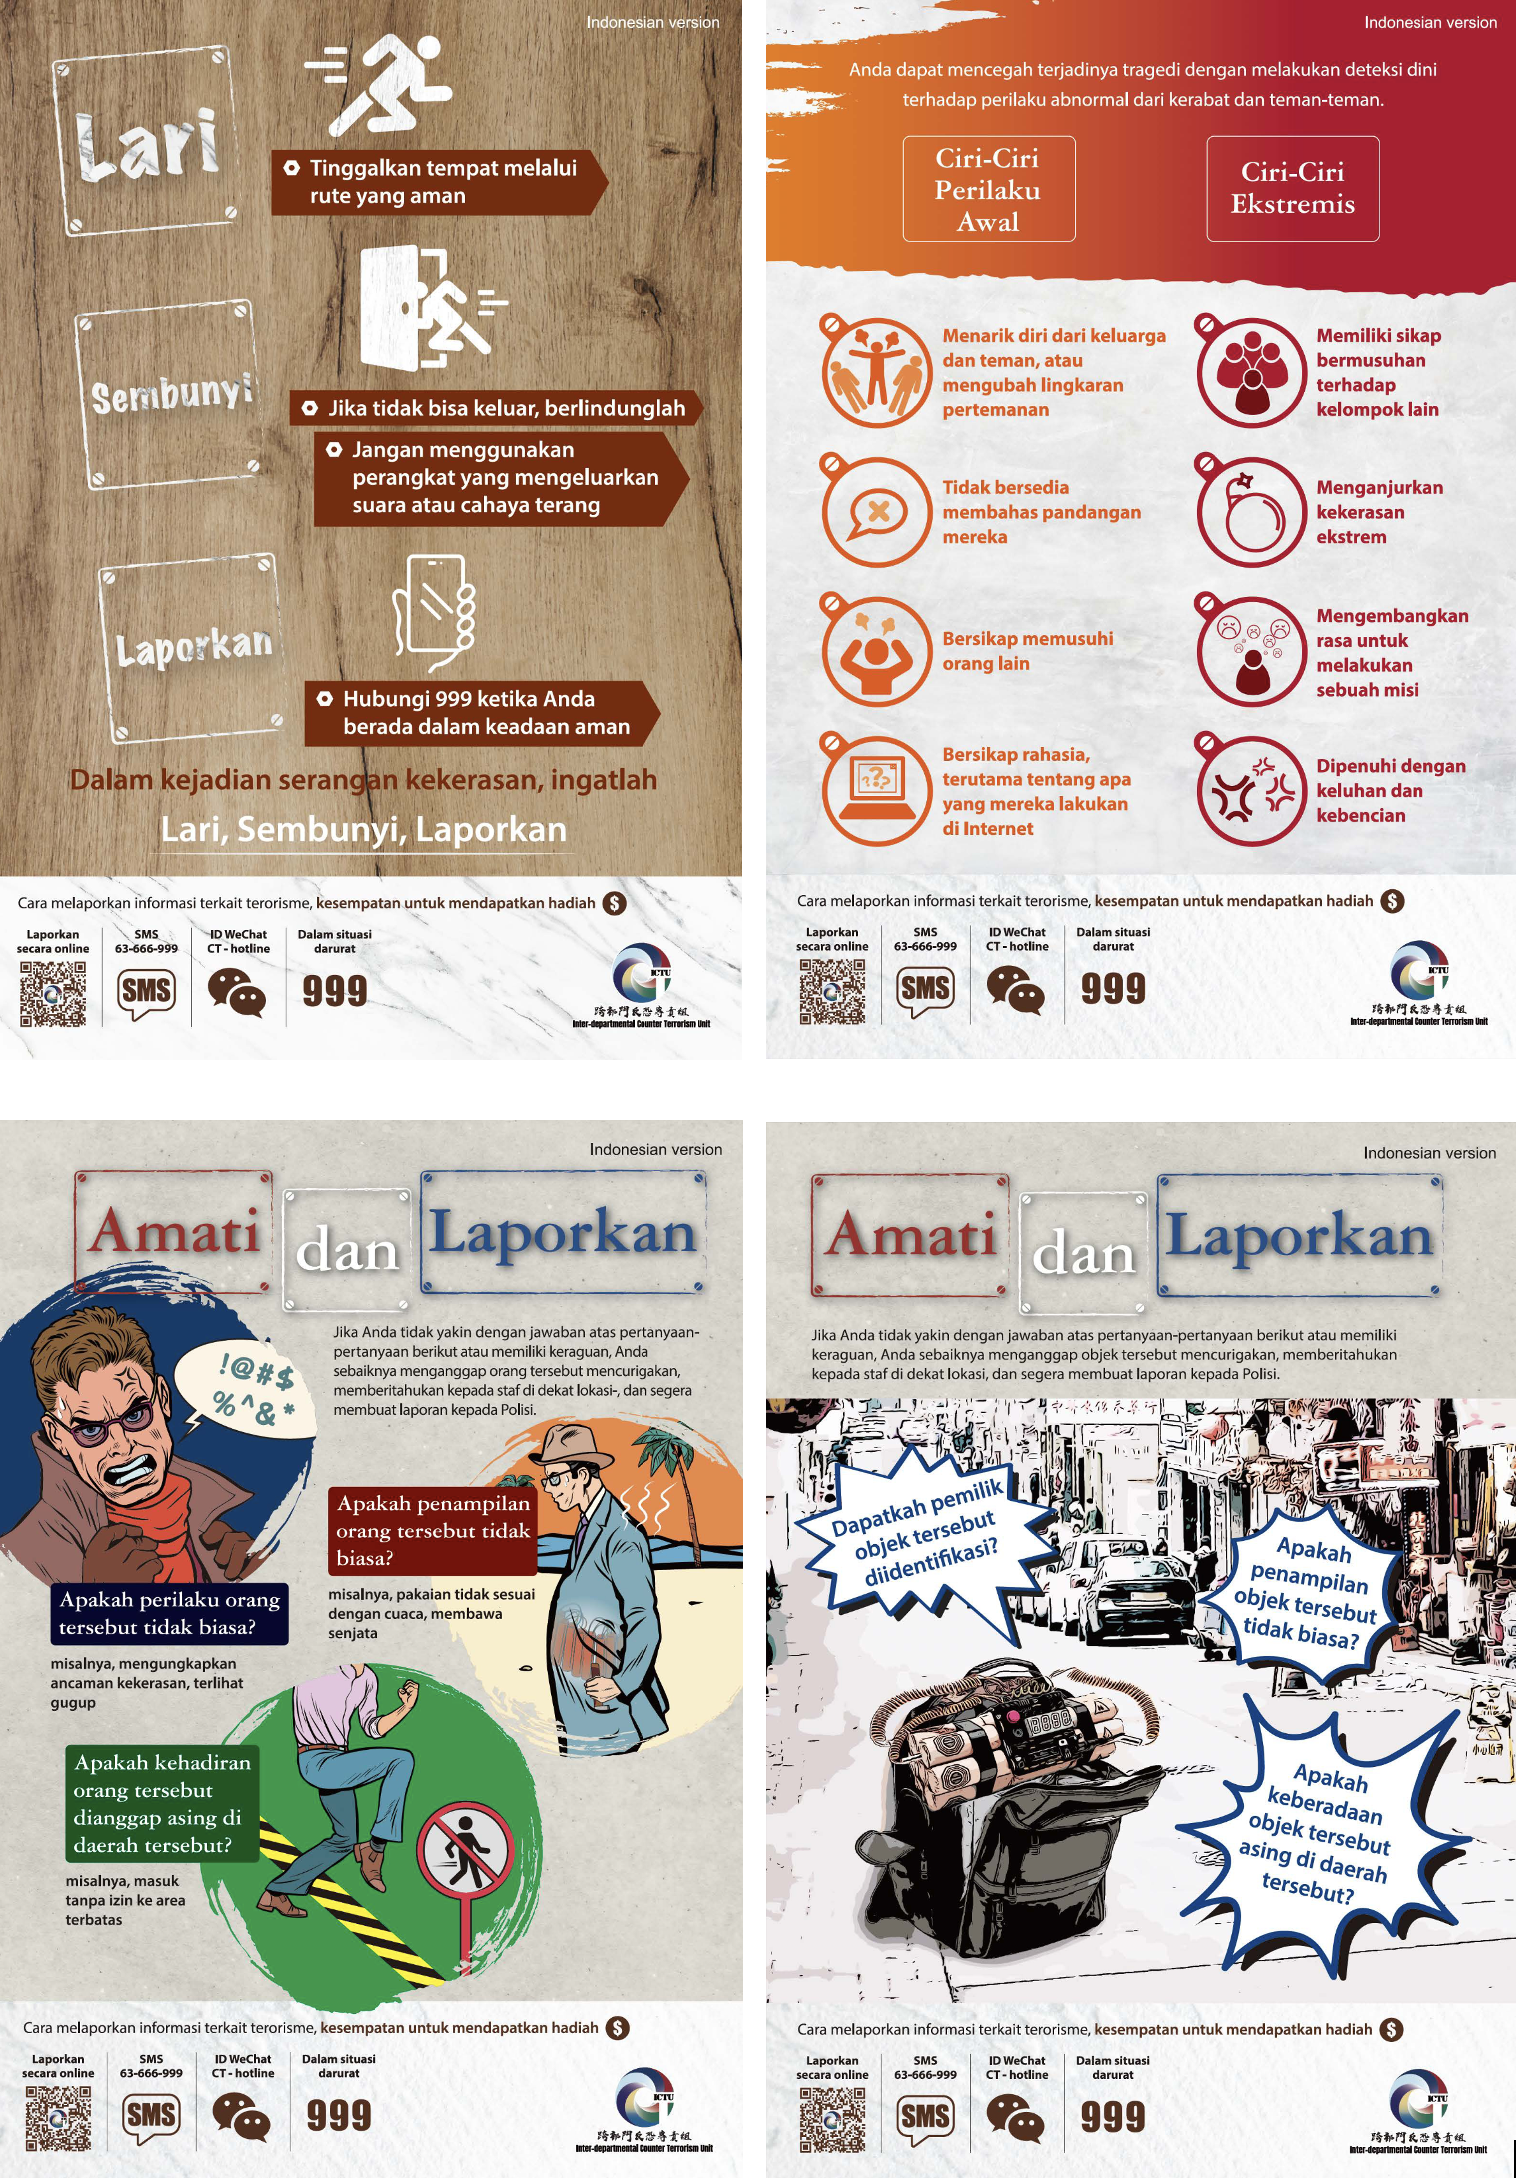 ‘Run, Hide, Report’, ‘Spot and Report – suspicious person’, ‘Spot and Report – suspicious objects’ and ‘Guidelines for identifying Extremist Thoughts’  – Indonesian version